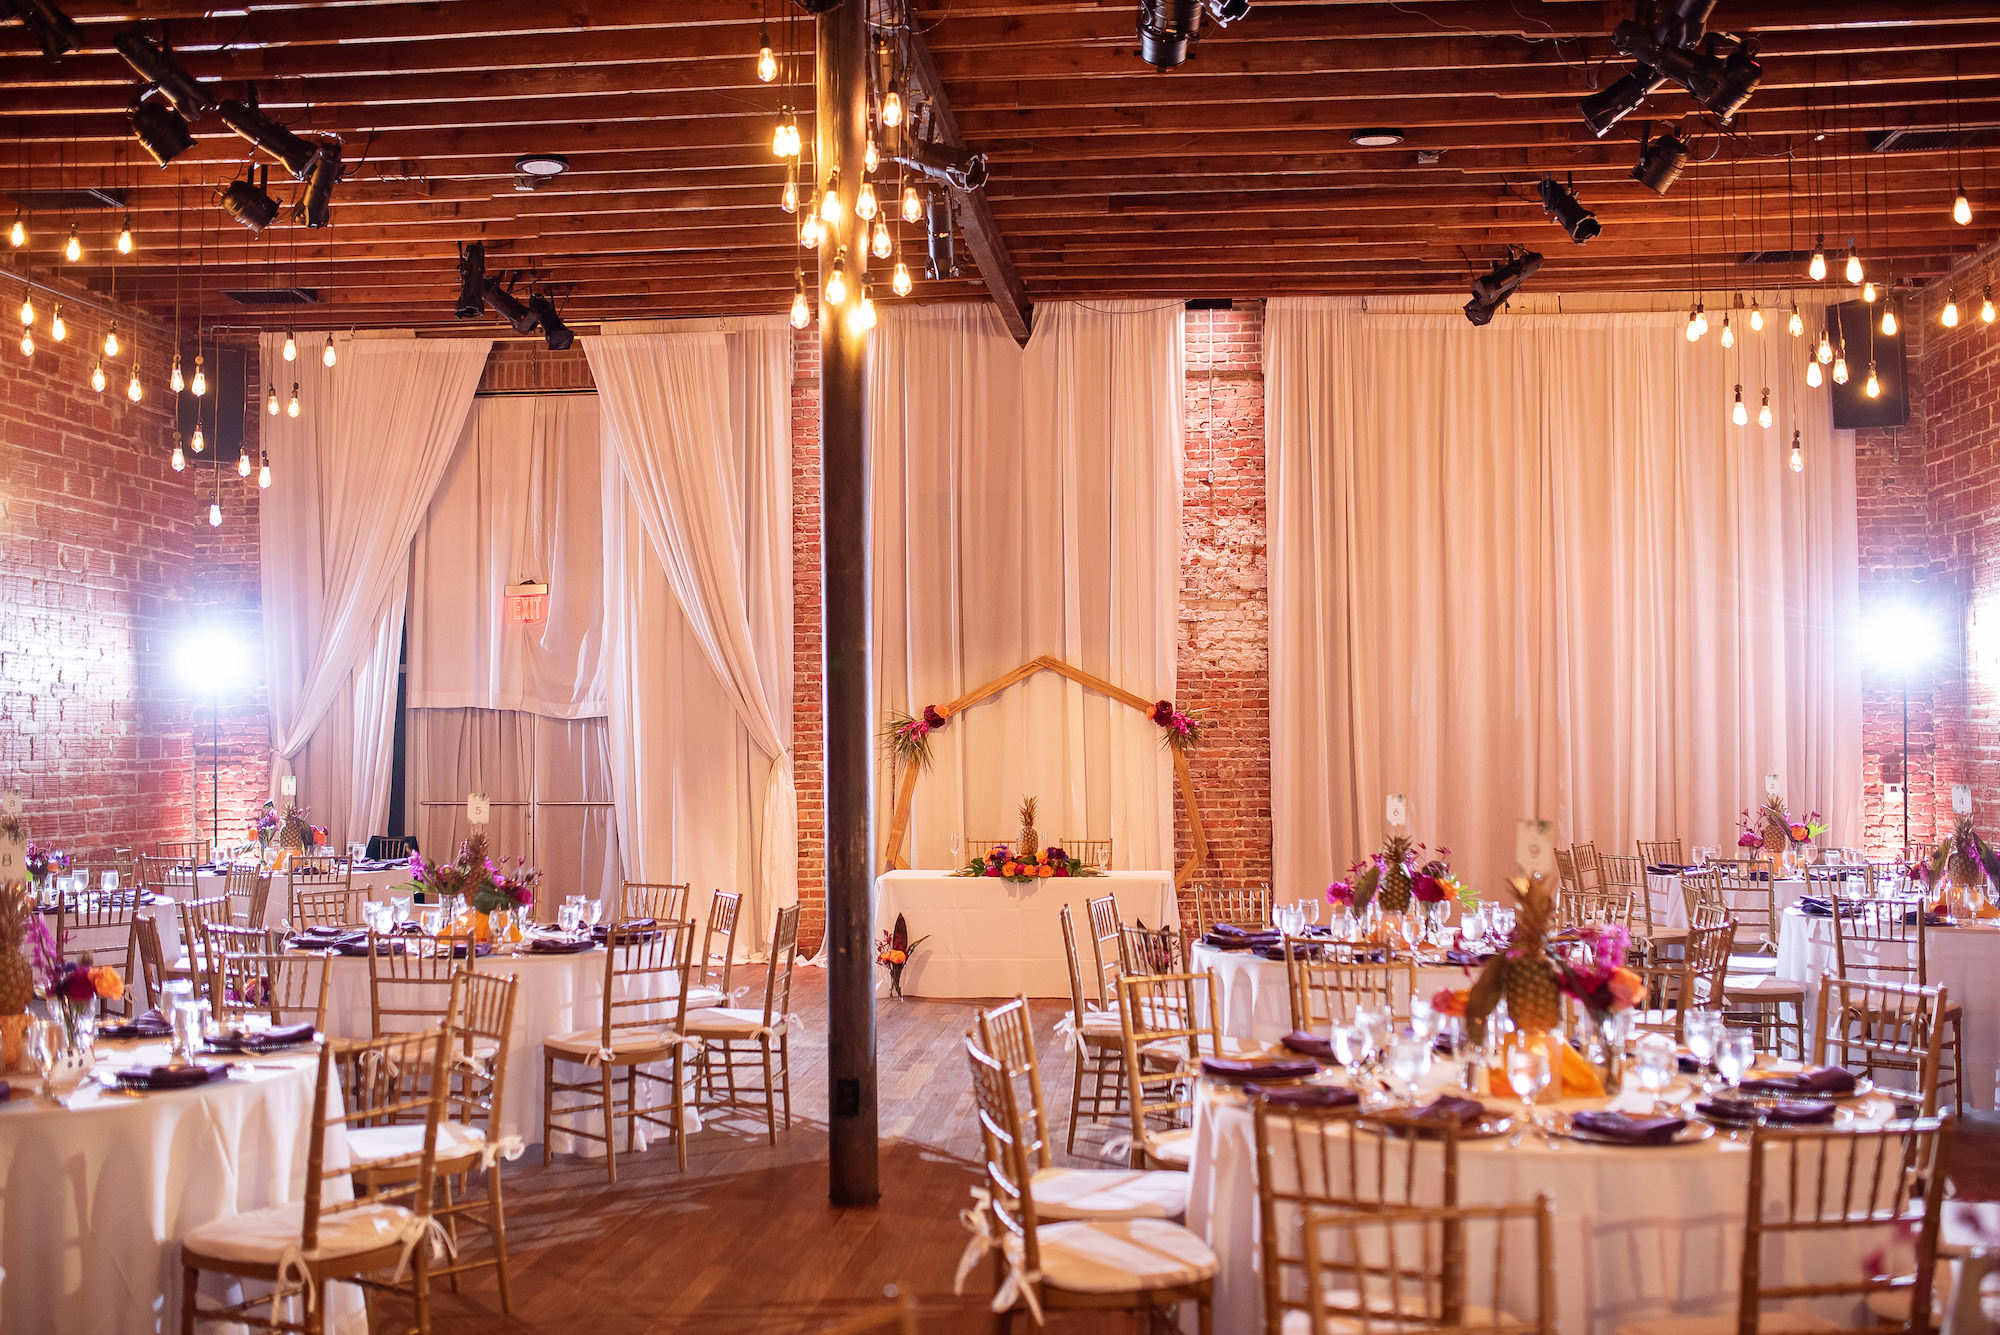 Industrial Indoor Wedding Reception White Linens and Gold Chairs with White Draping | St. Pete Wedding Venue Nova 535